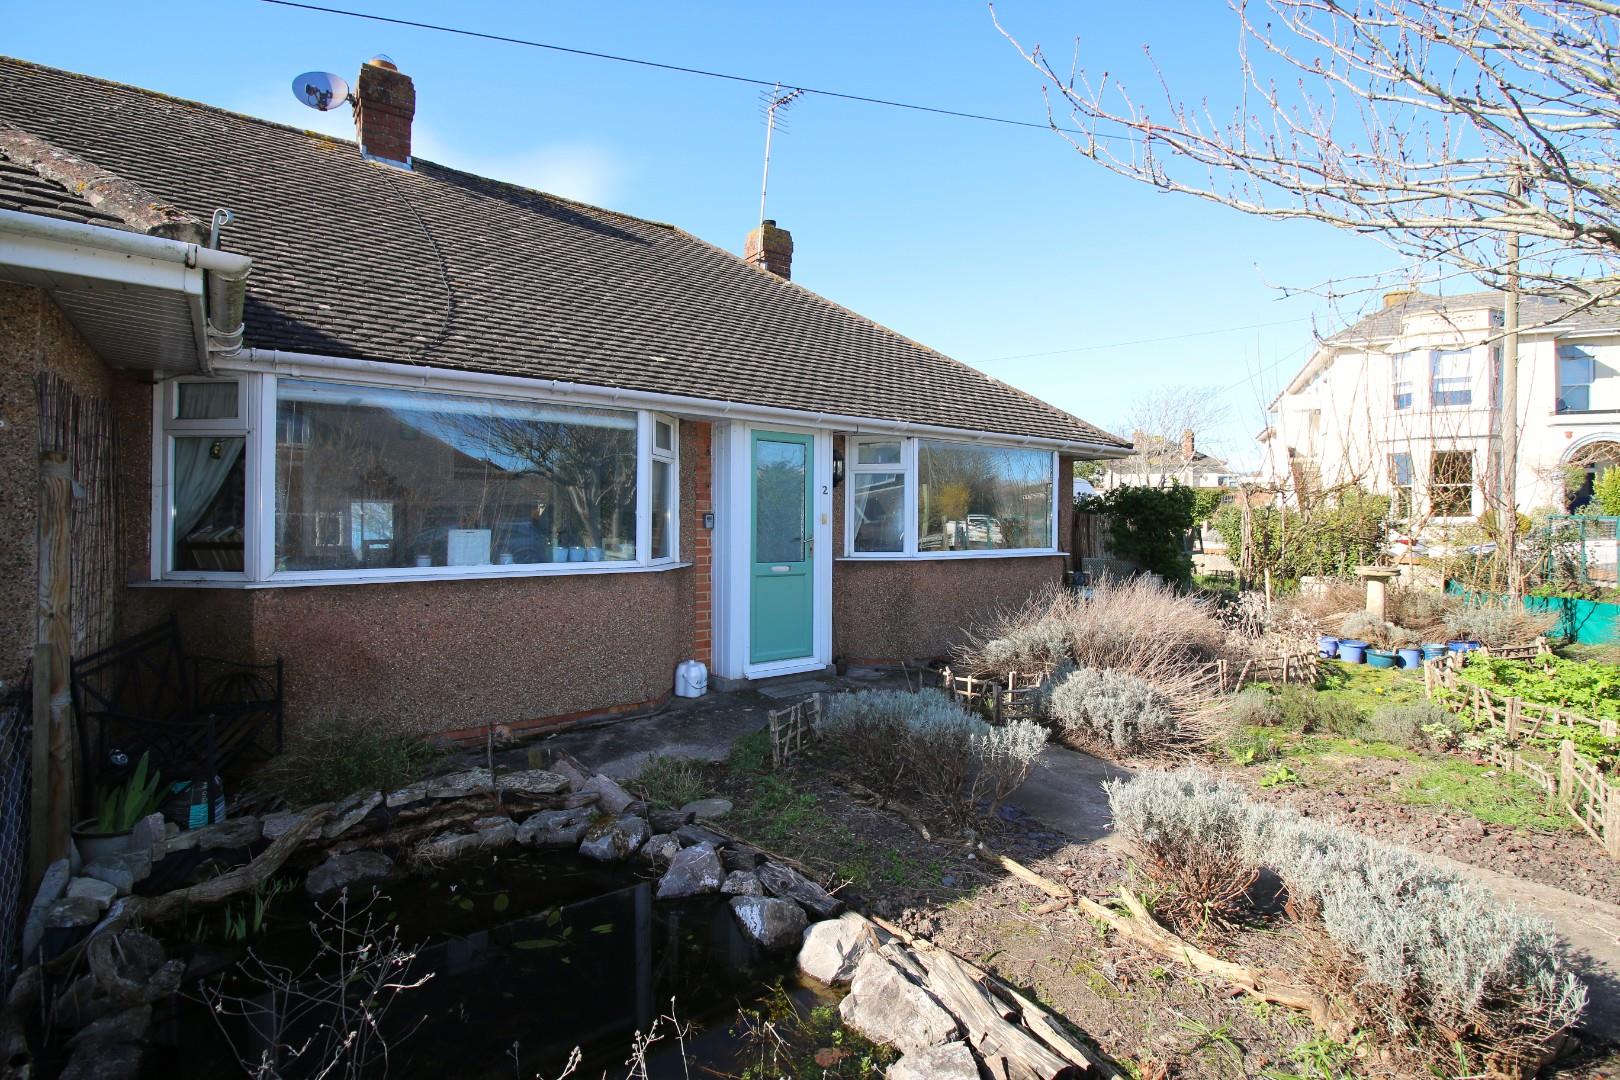 Two bedroom bungalow located in the sought after coastal village of Uphill